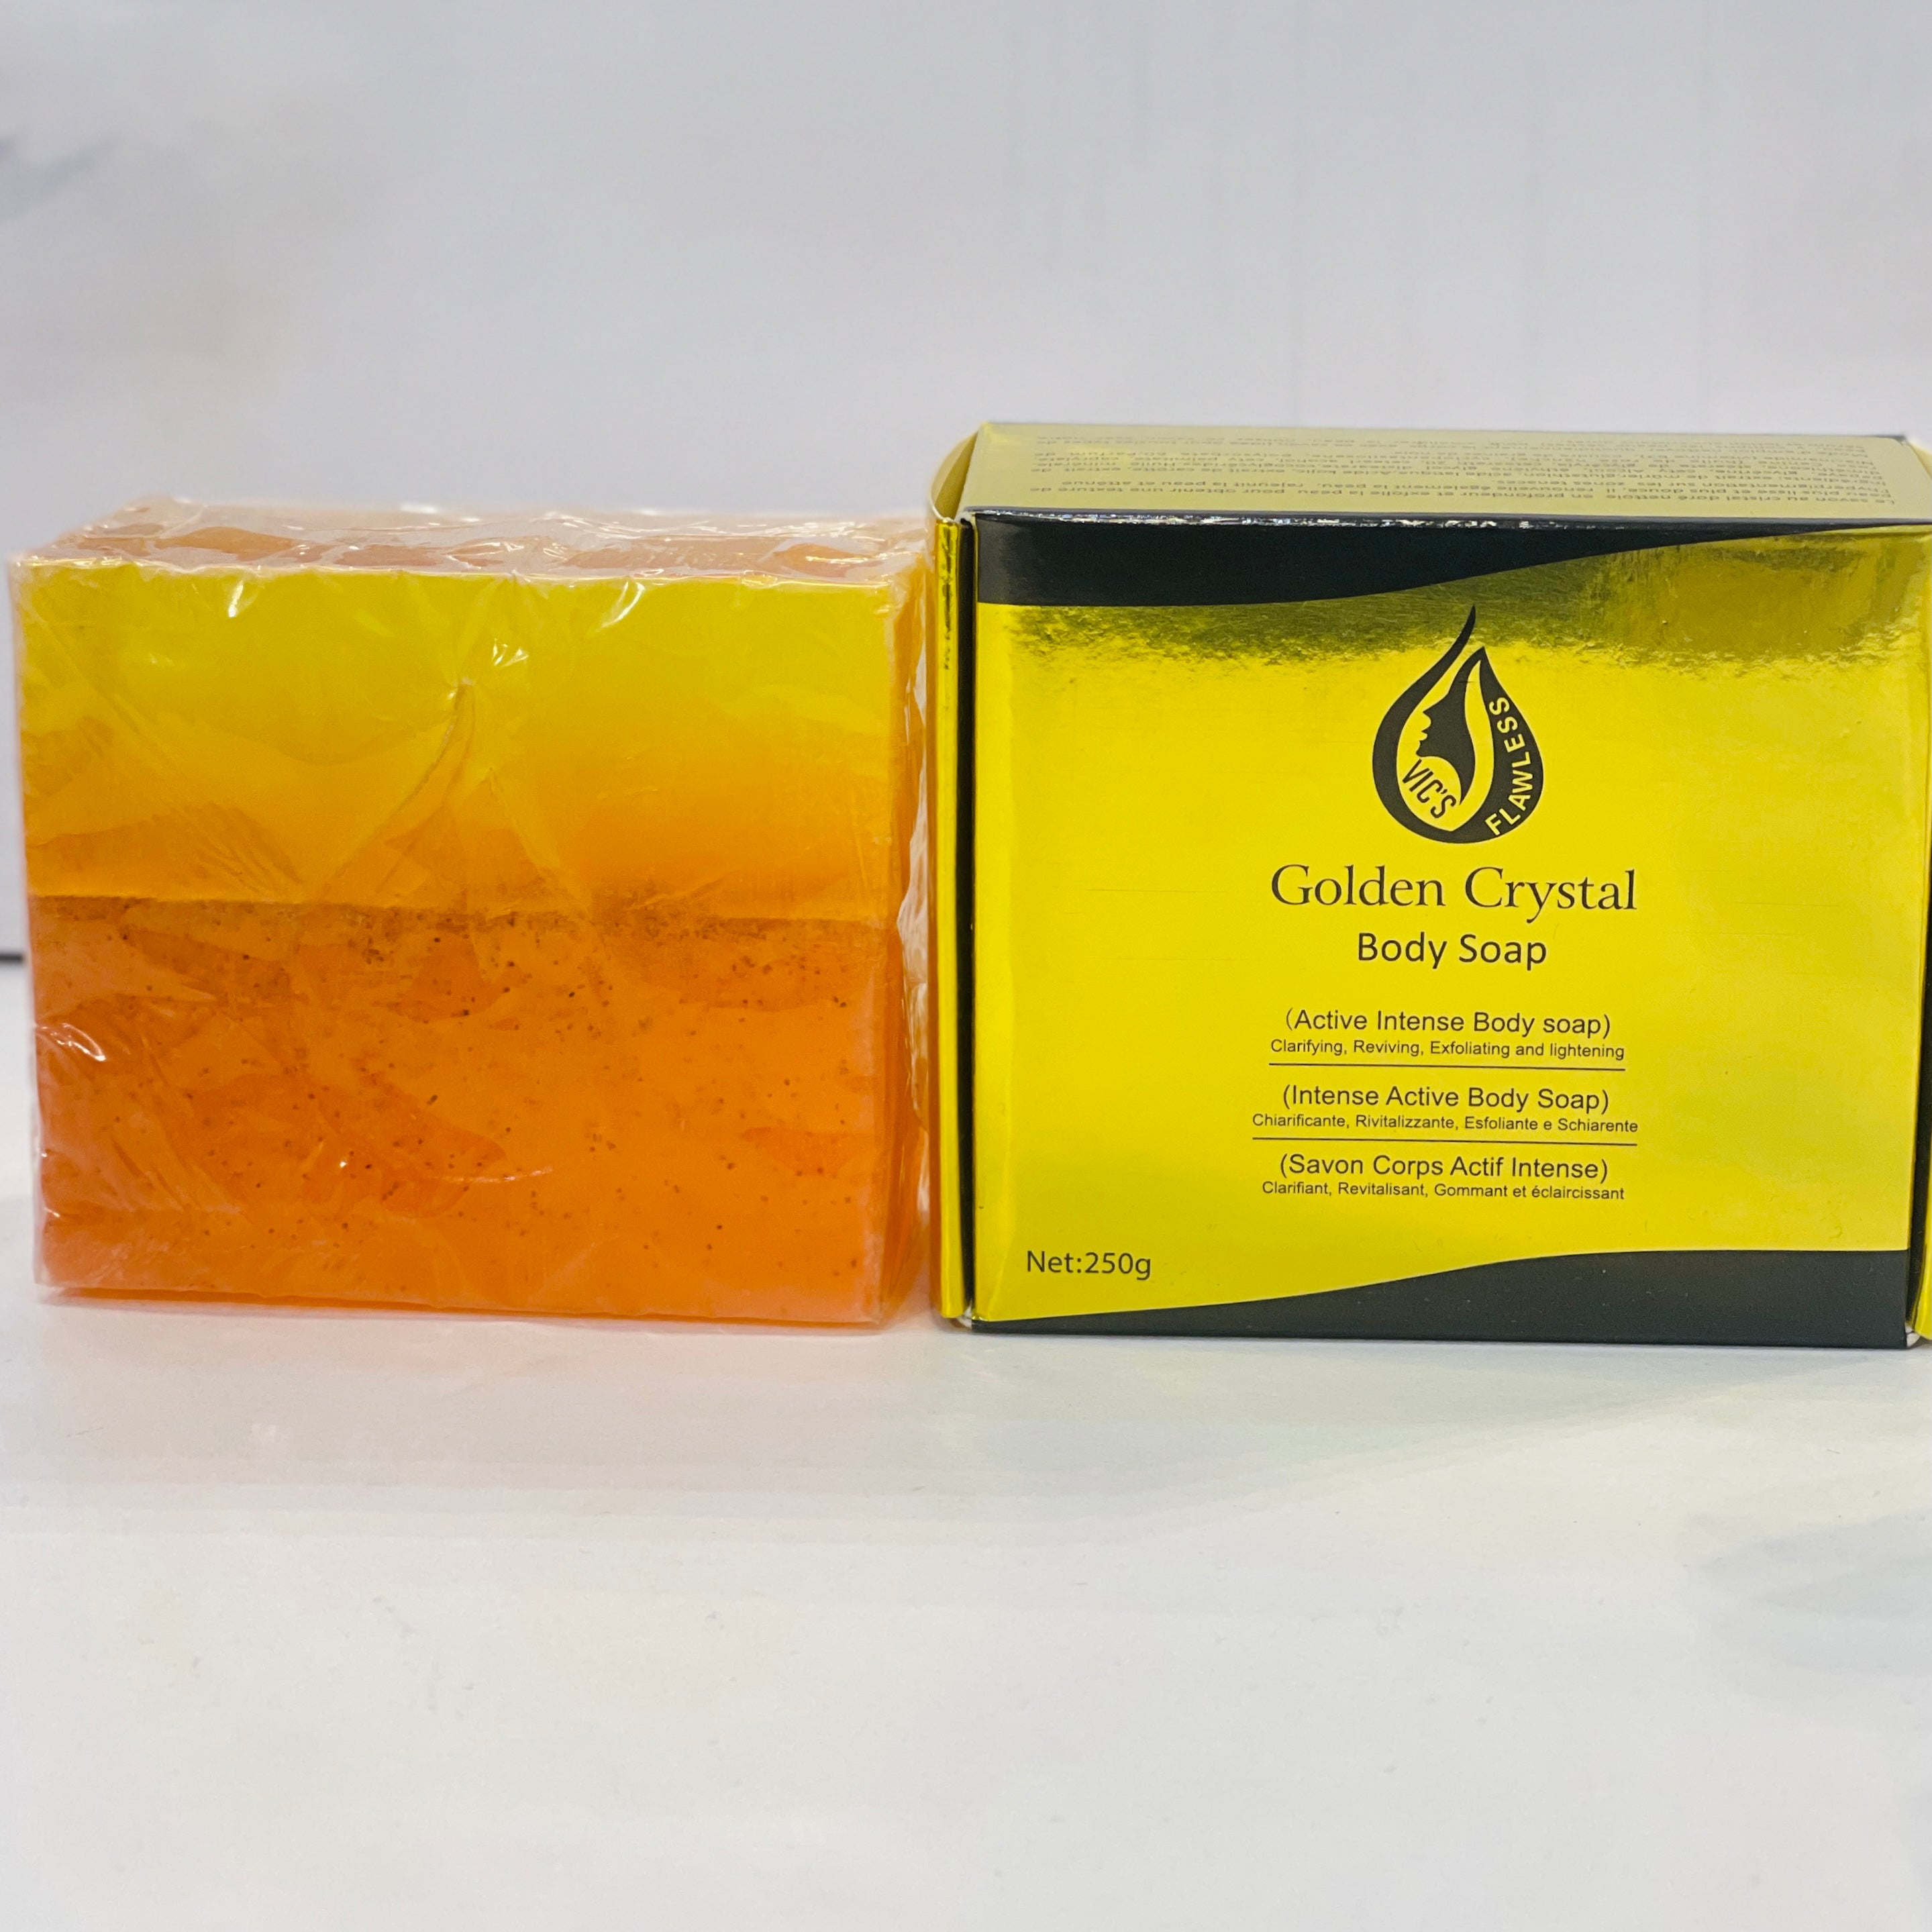 Golden Crystal (Face and Body Soap)